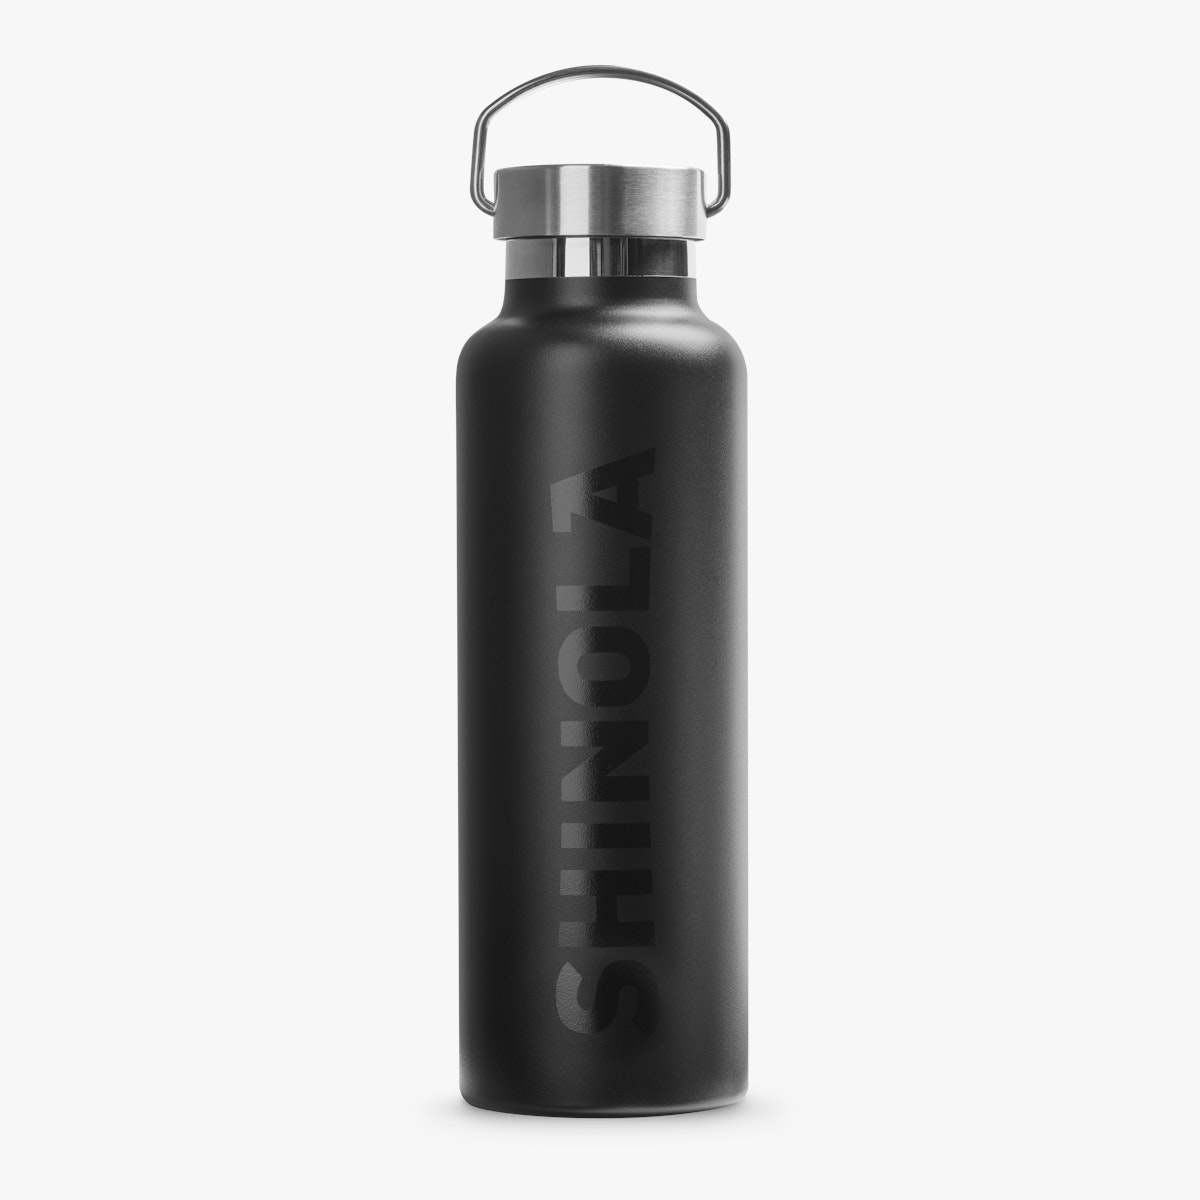 https://shinola-m2.imgix.net/images/Products/20273082-sdt-000011458/20273082_BlackStainlesWaterBottle_Steel_V1_MAIN_01.png?h=1200&w=1200&bg=f7f7f7&q=80&auto=format,compress&fit=fillmax